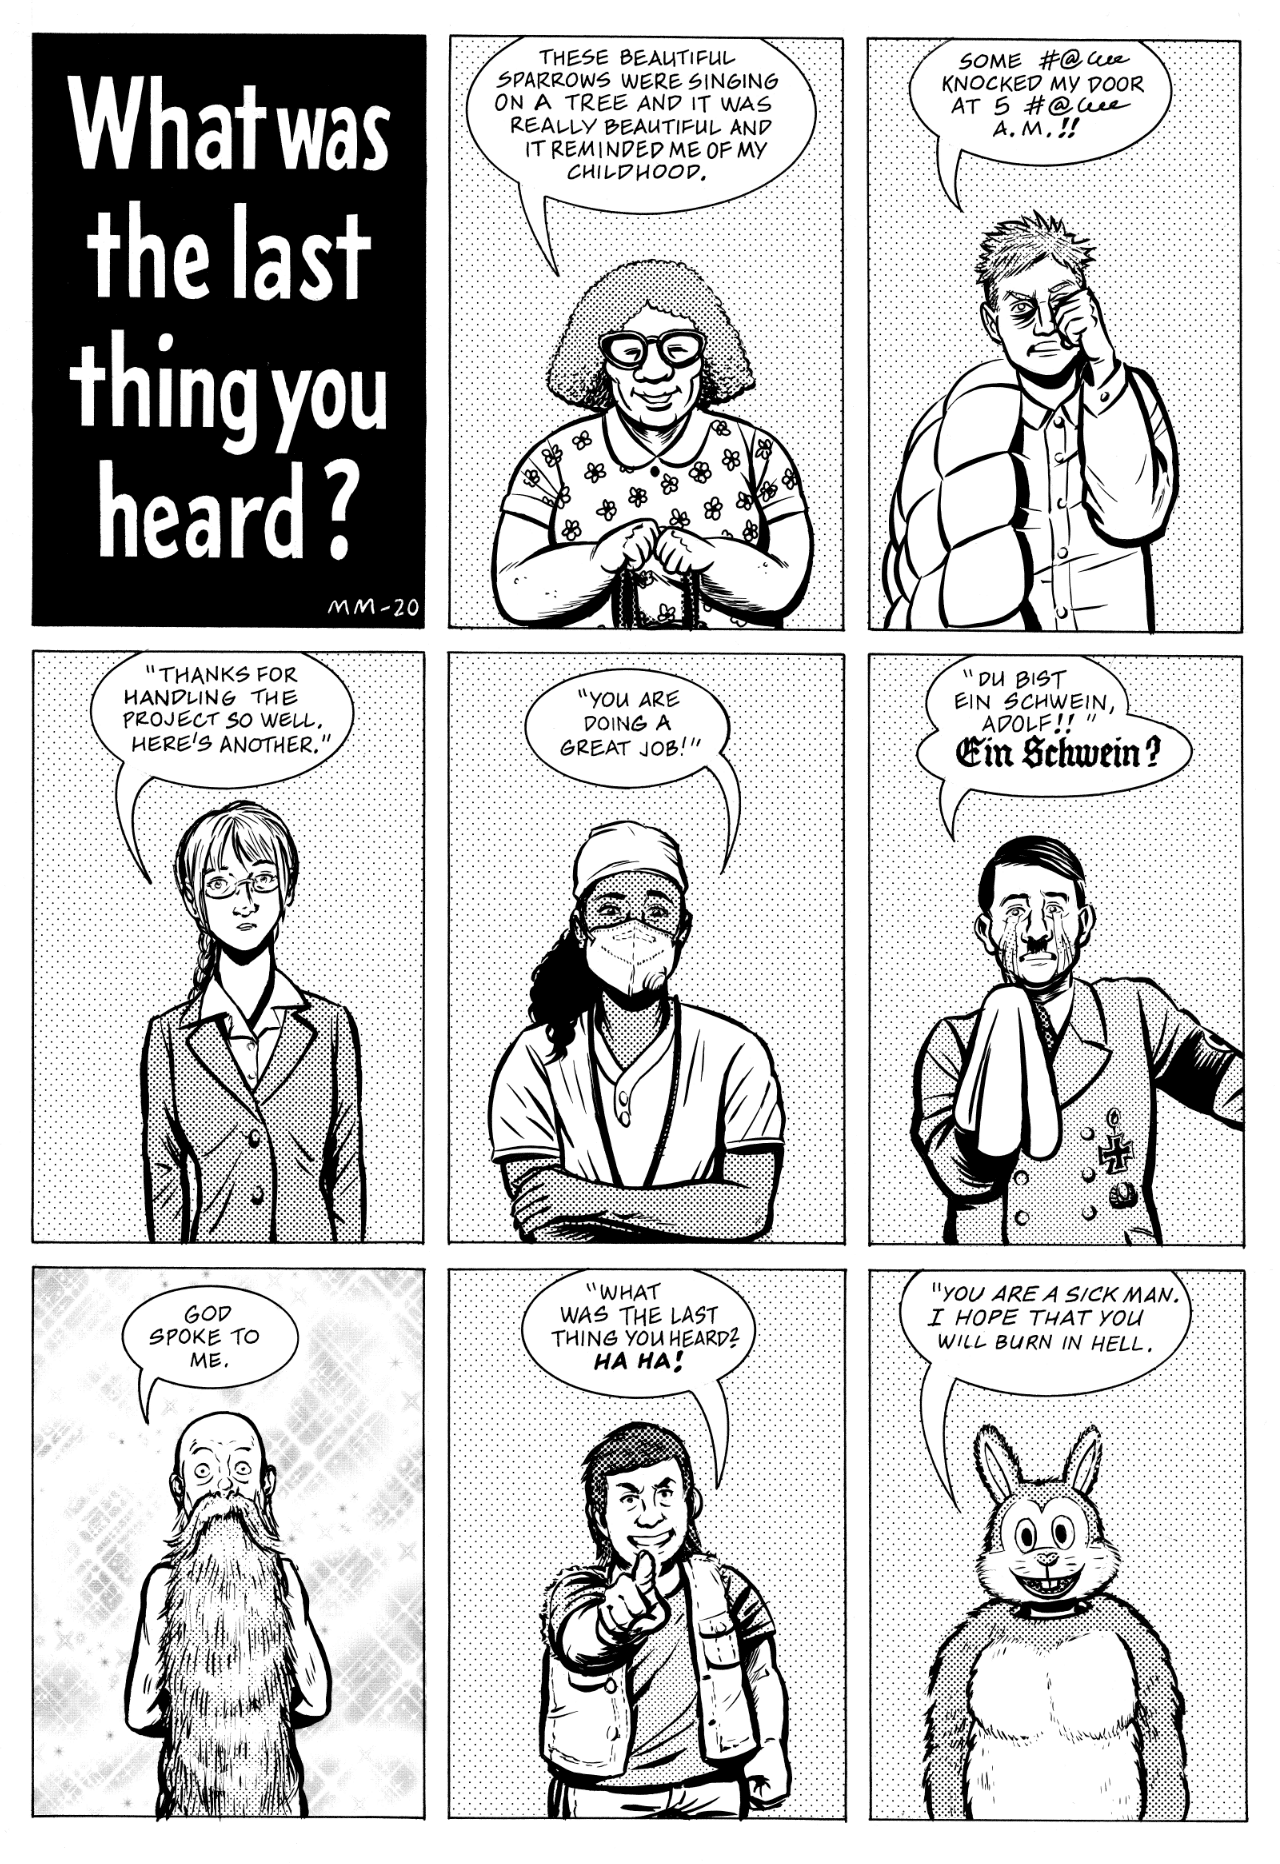 What was the last thing you heard?,  Comics What was the last thing you heard?,  text: Whatwas the last thing you heard? I THANKS FOR HANPVIN& pzOJZf SO we-L.L. ANOTHER. 